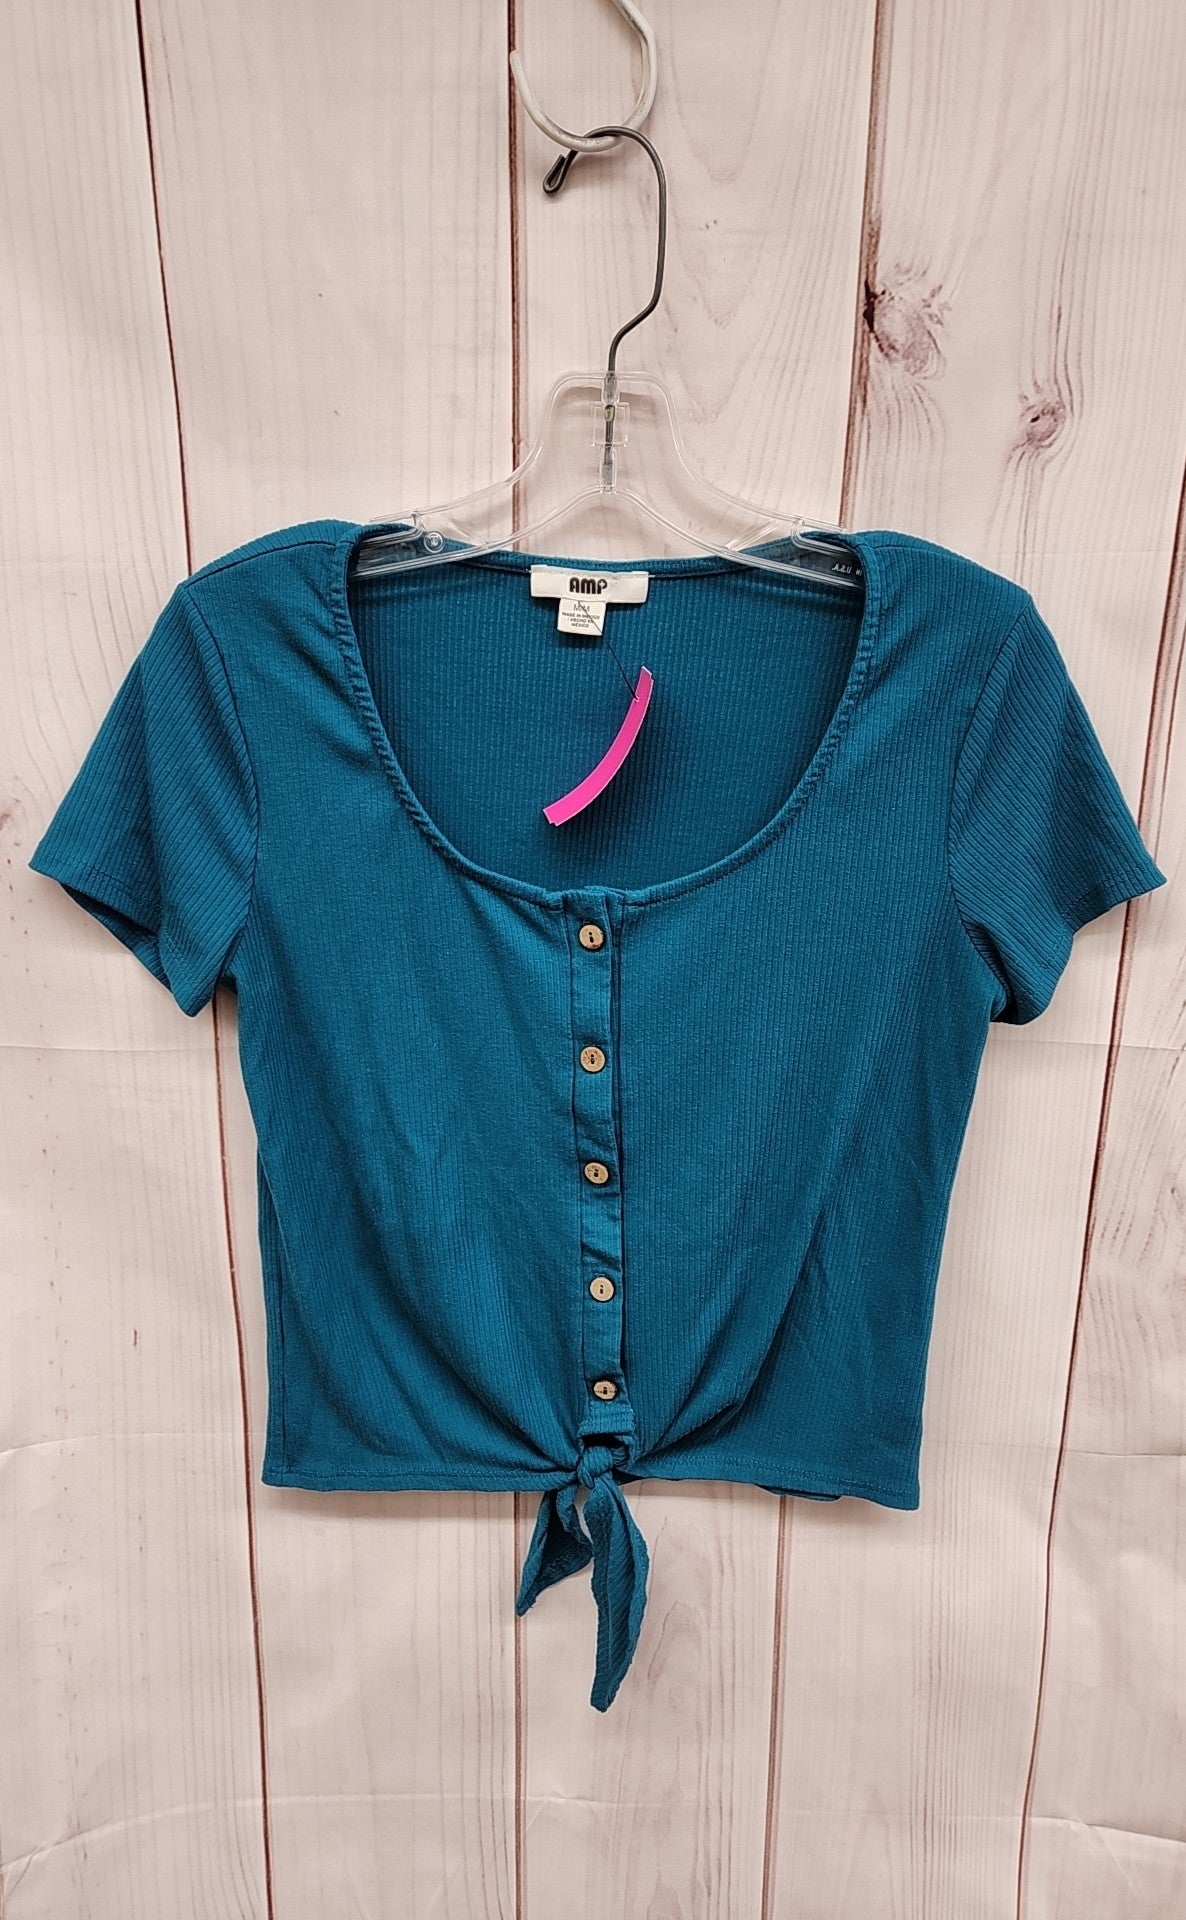 AMP Women's Size M Teal Short Sleeve Top